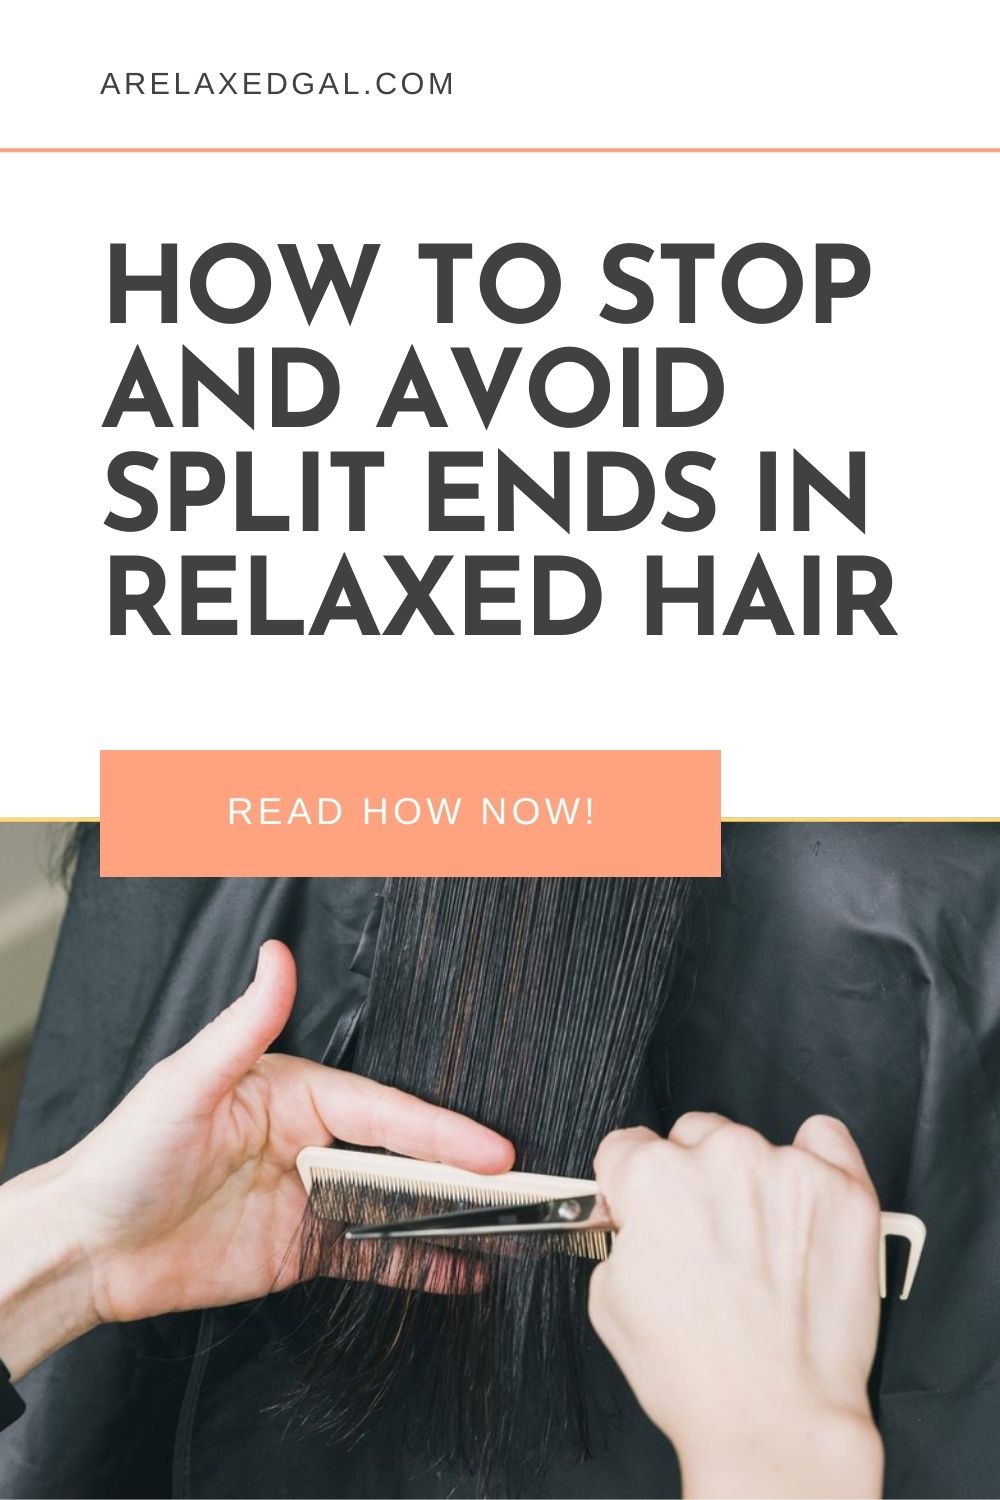 How To Stop And Avoid Split Ends In Relaxed Hair | A Relaxed Gal